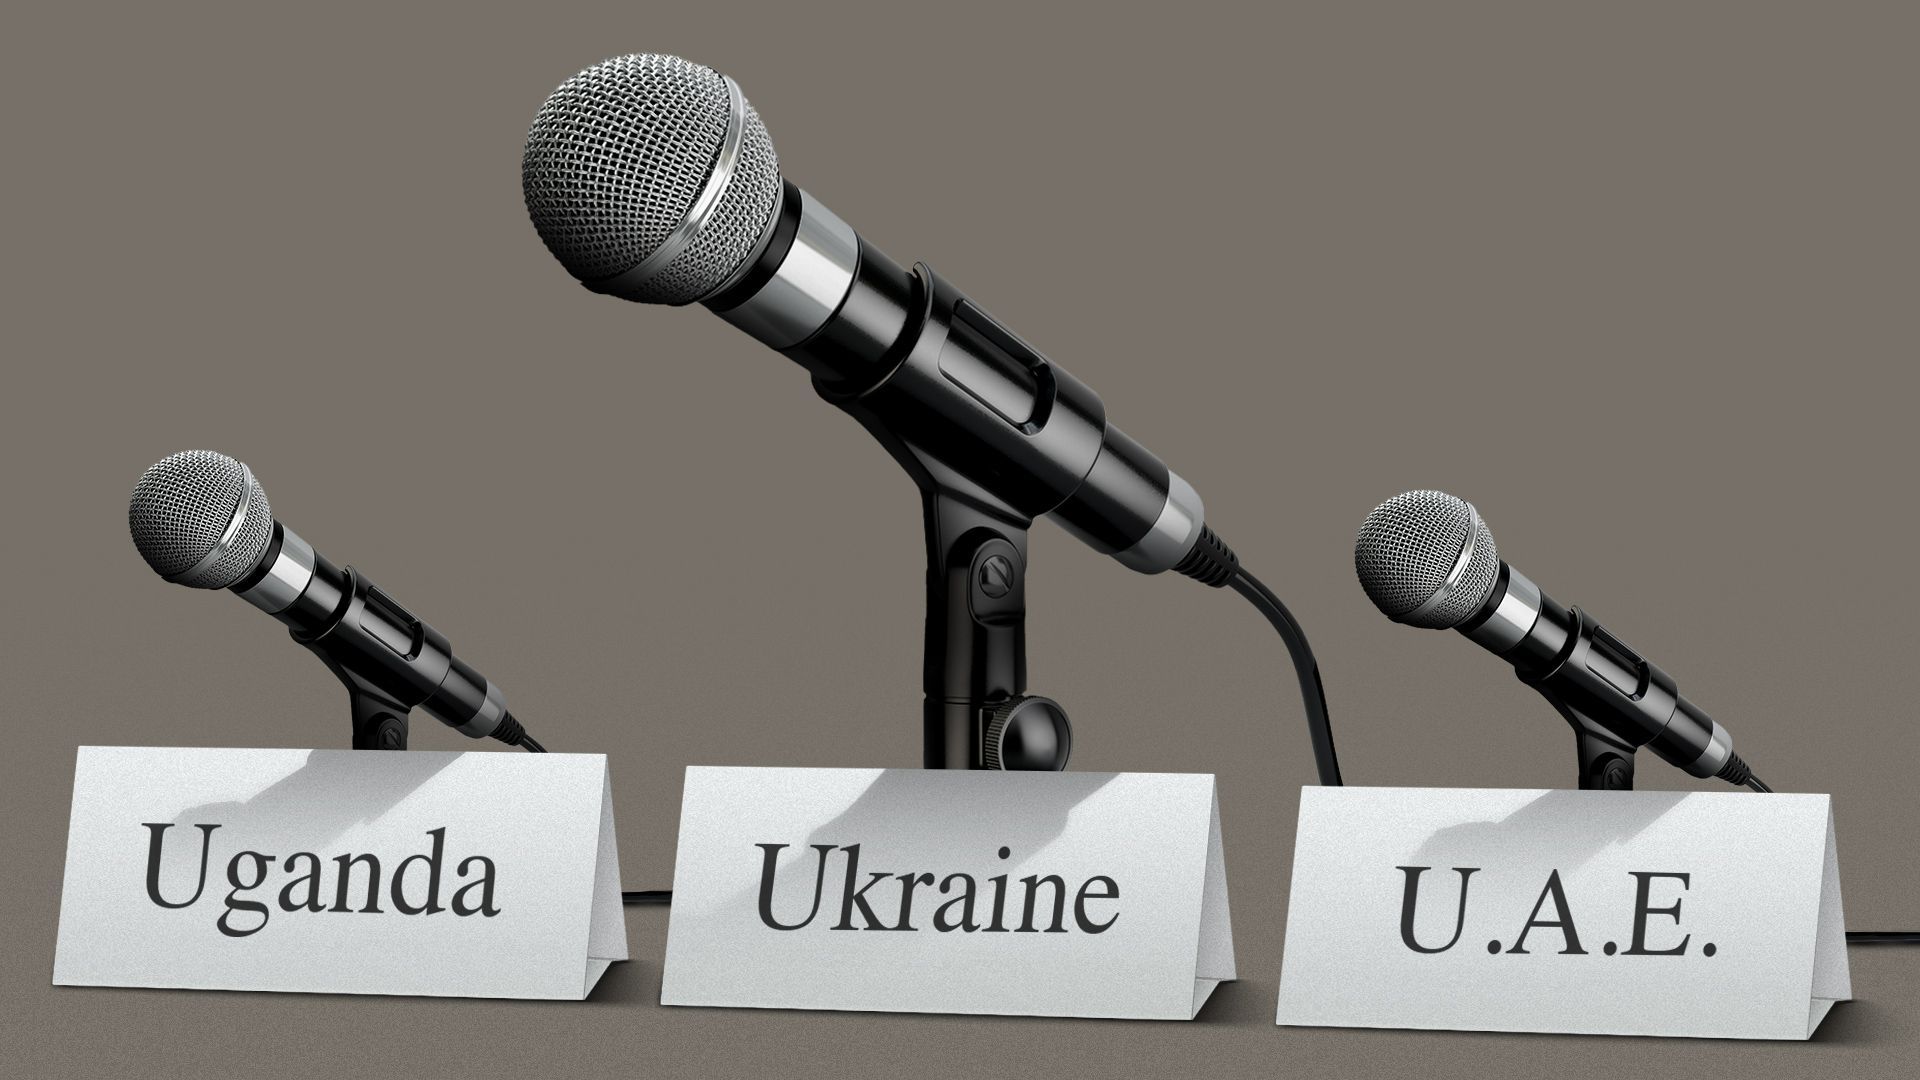 Illustration of country name placards at the UN with microphones, with Ukraine's microphone bigger than all others. 